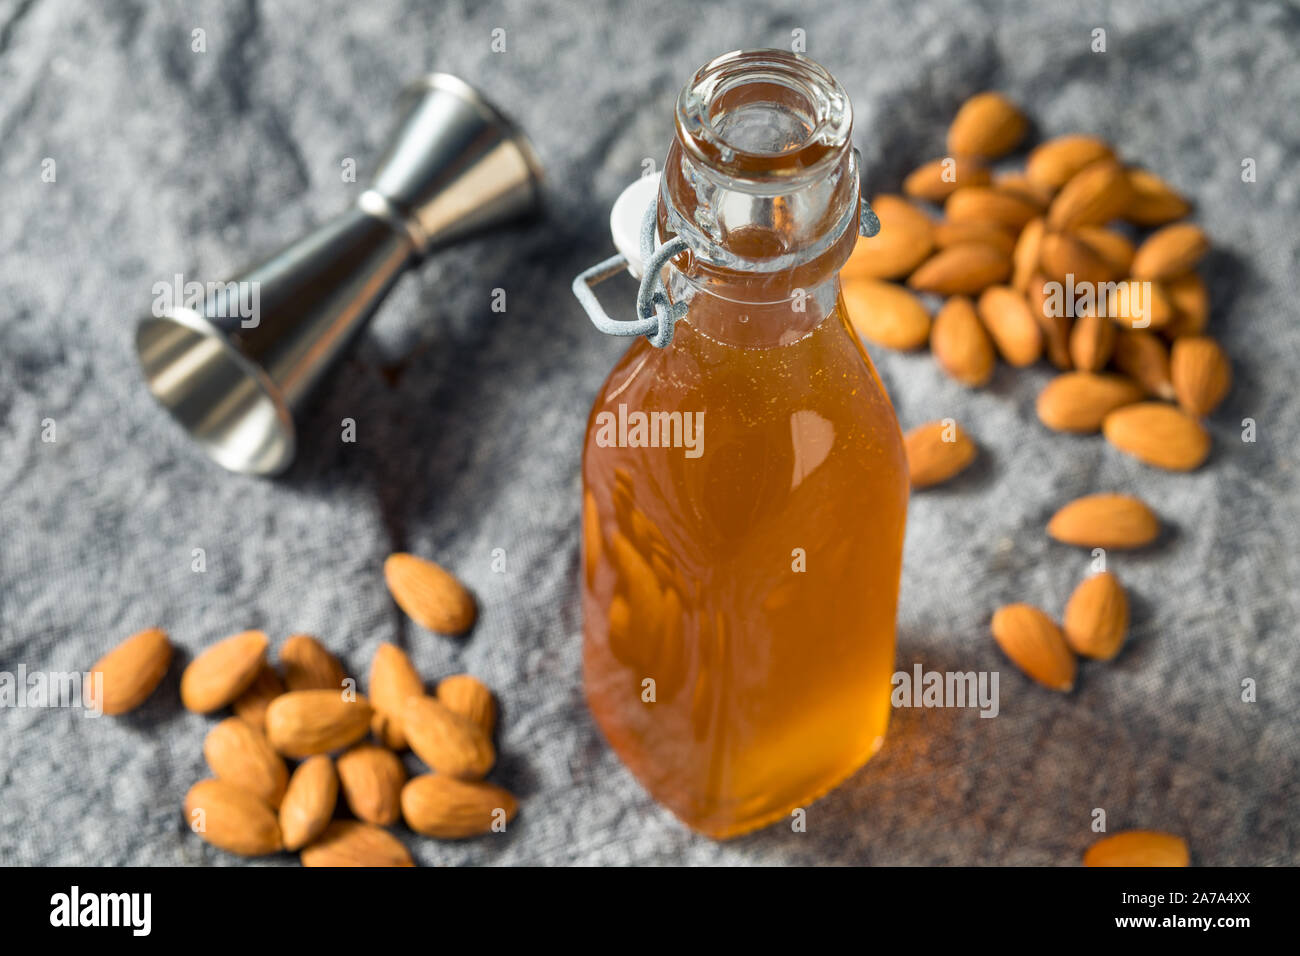 Homemade Organic Almond Orgeat Syrup in a Bottle Stock Photo